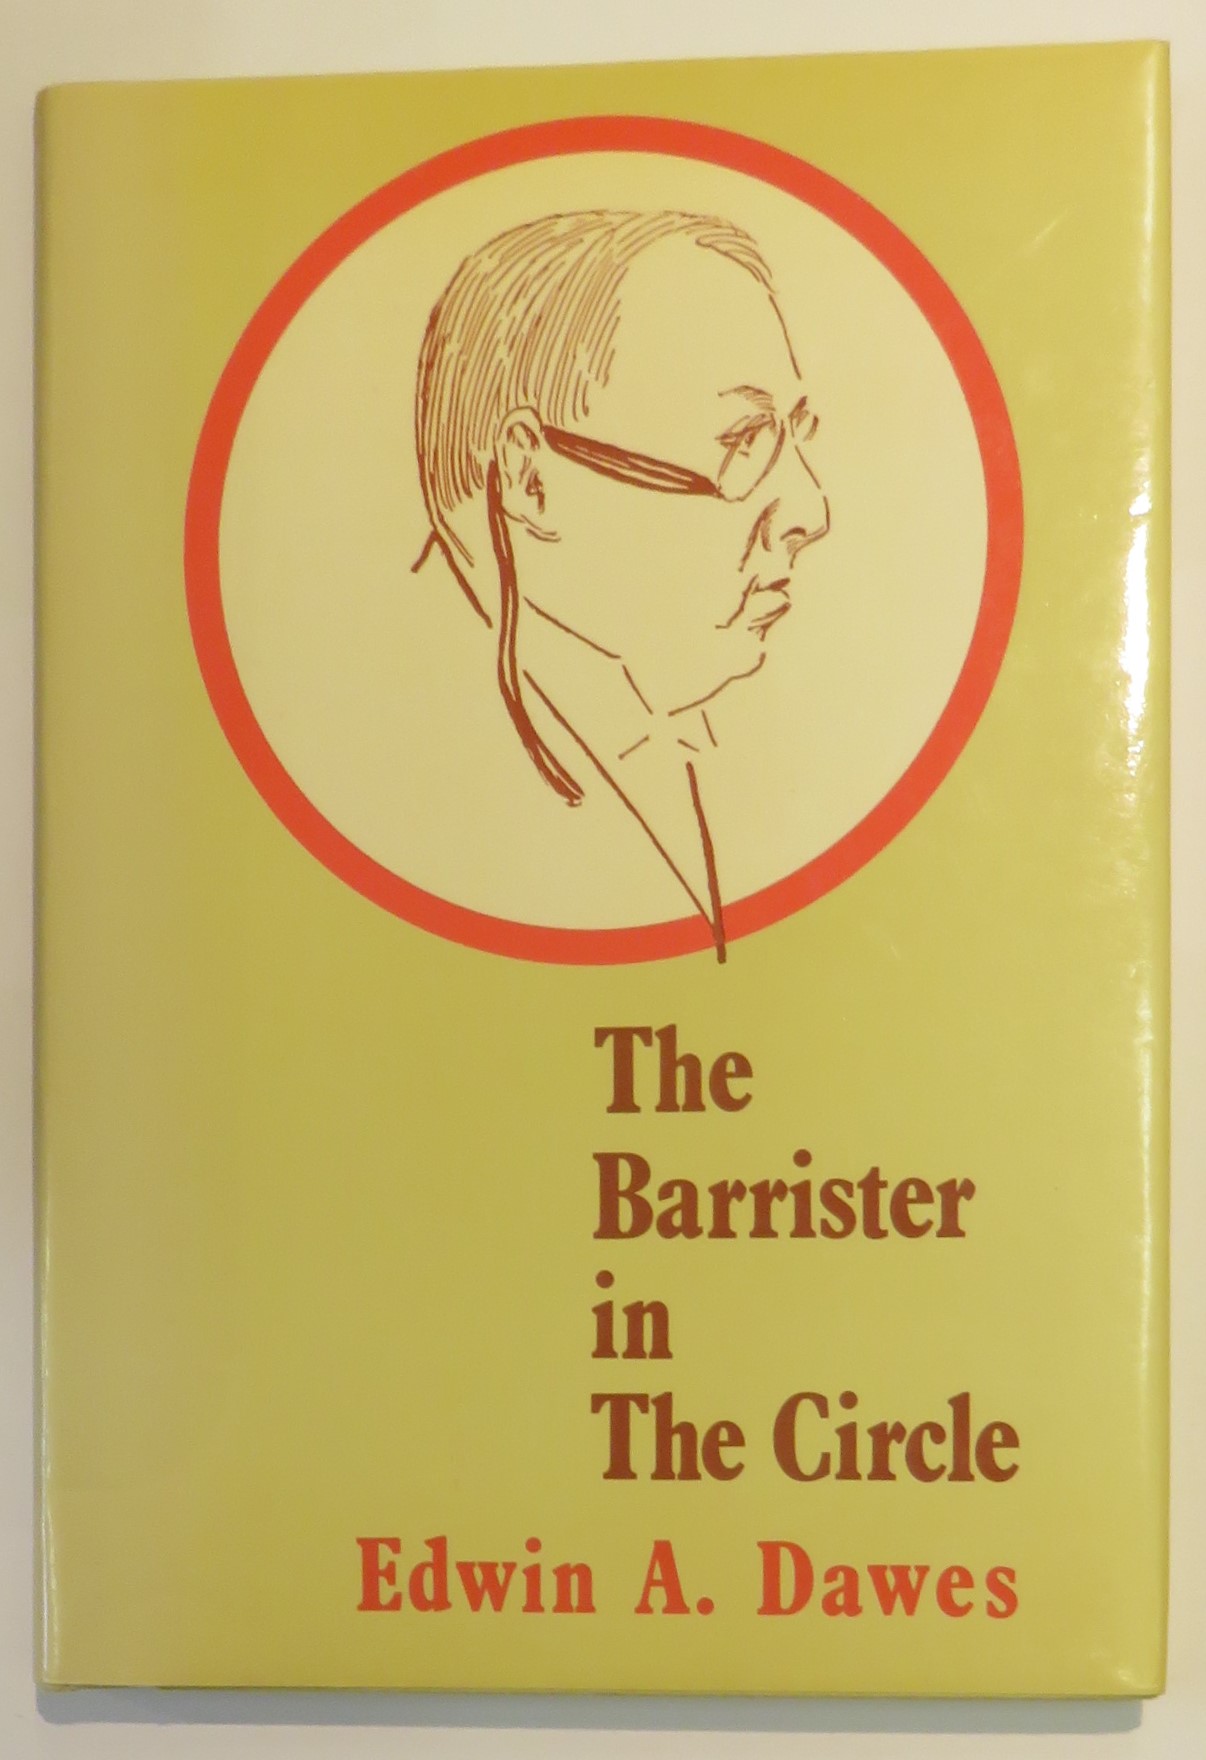 The Barrister in the Circle